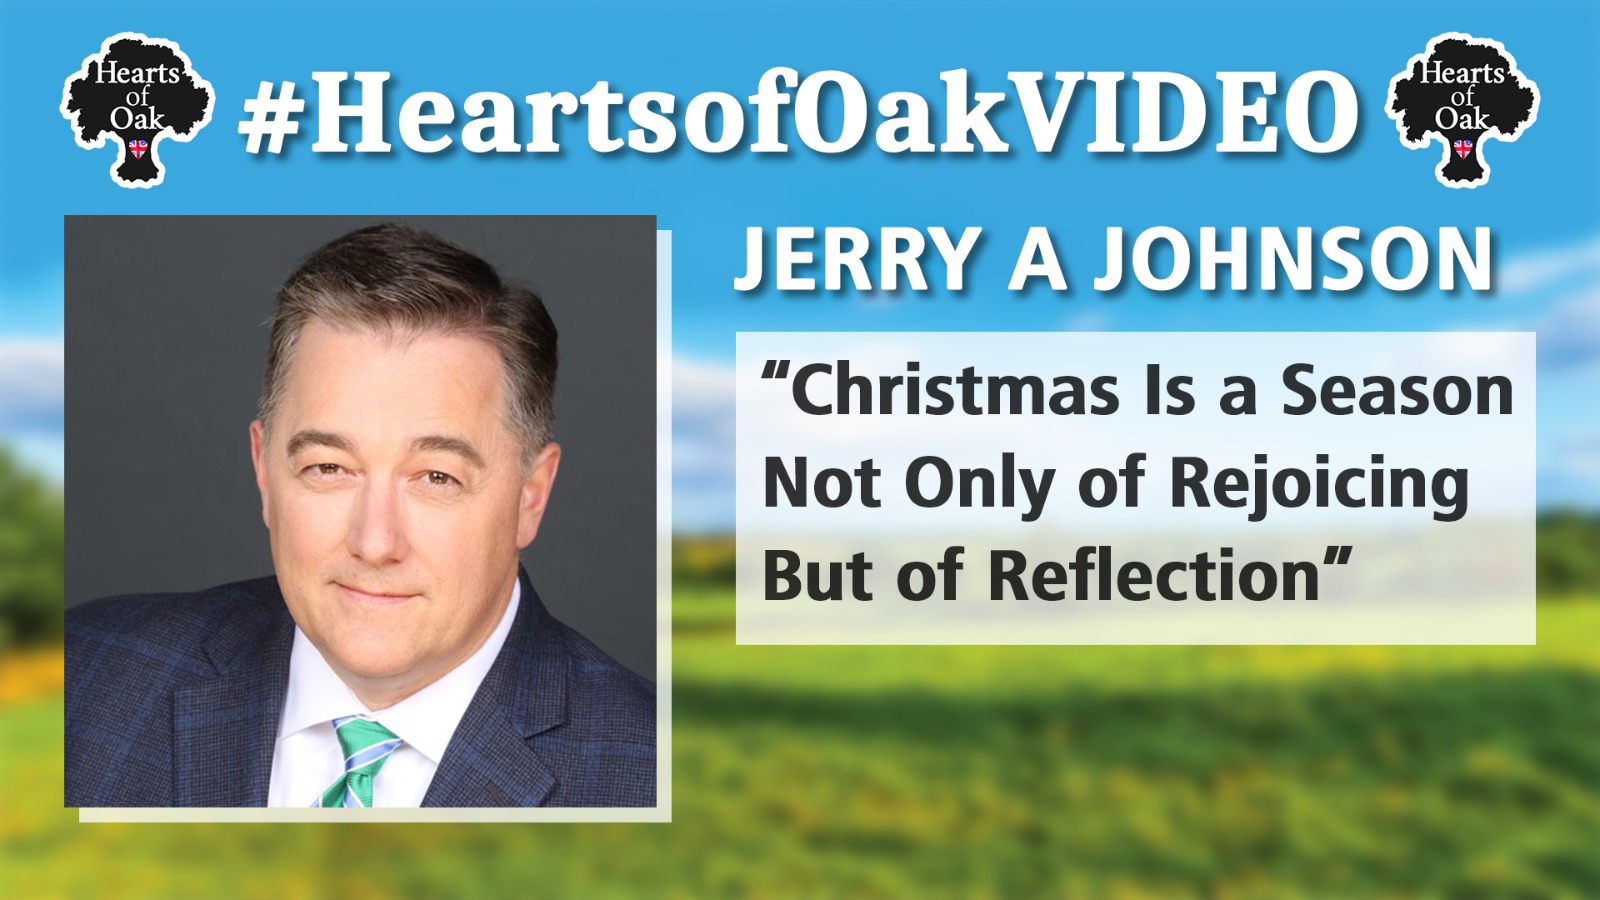 Dr Jerry A Johnson - Christmas Is a Season Not Only of Rejoicing But of Reflection